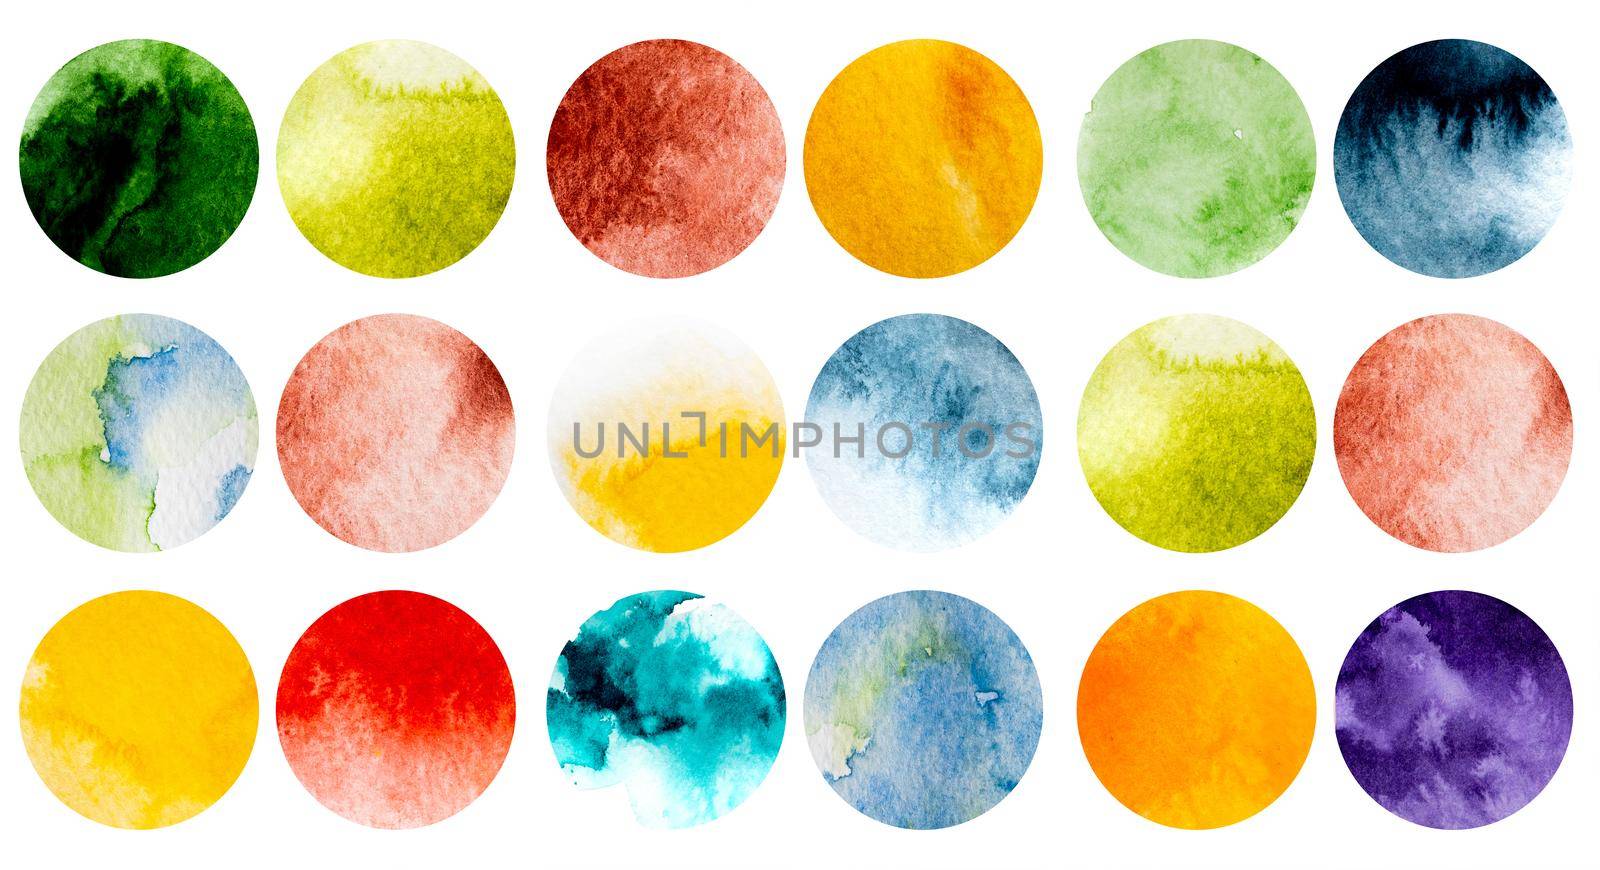 Watercolor abstract art paintings with colorful spheres isolated on white background. Aquarelle creative drawings on textured paper canvas